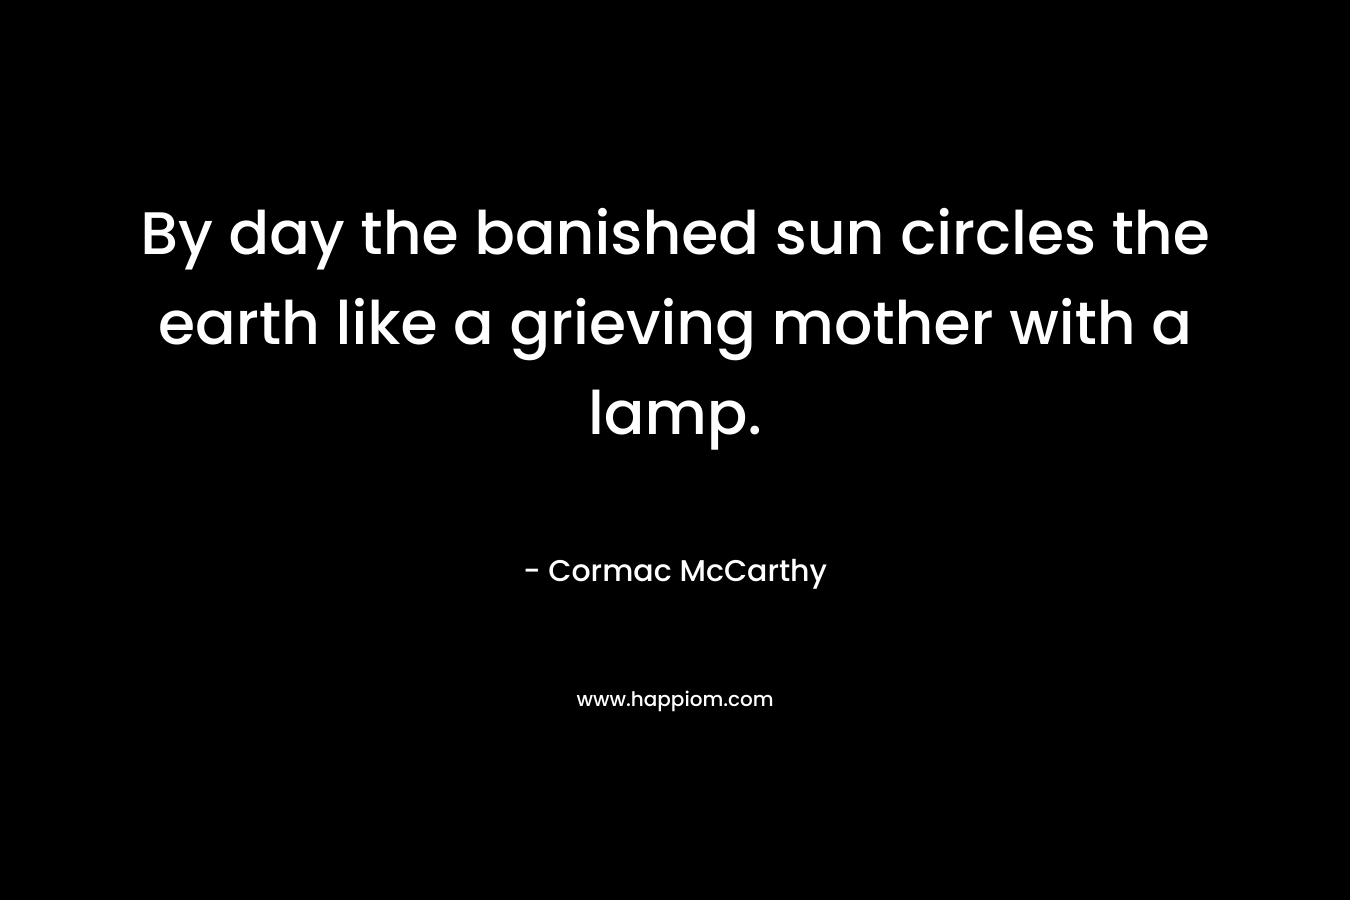 By day the banished sun circles the earth like a grieving mother with a lamp. – Cormac McCarthy